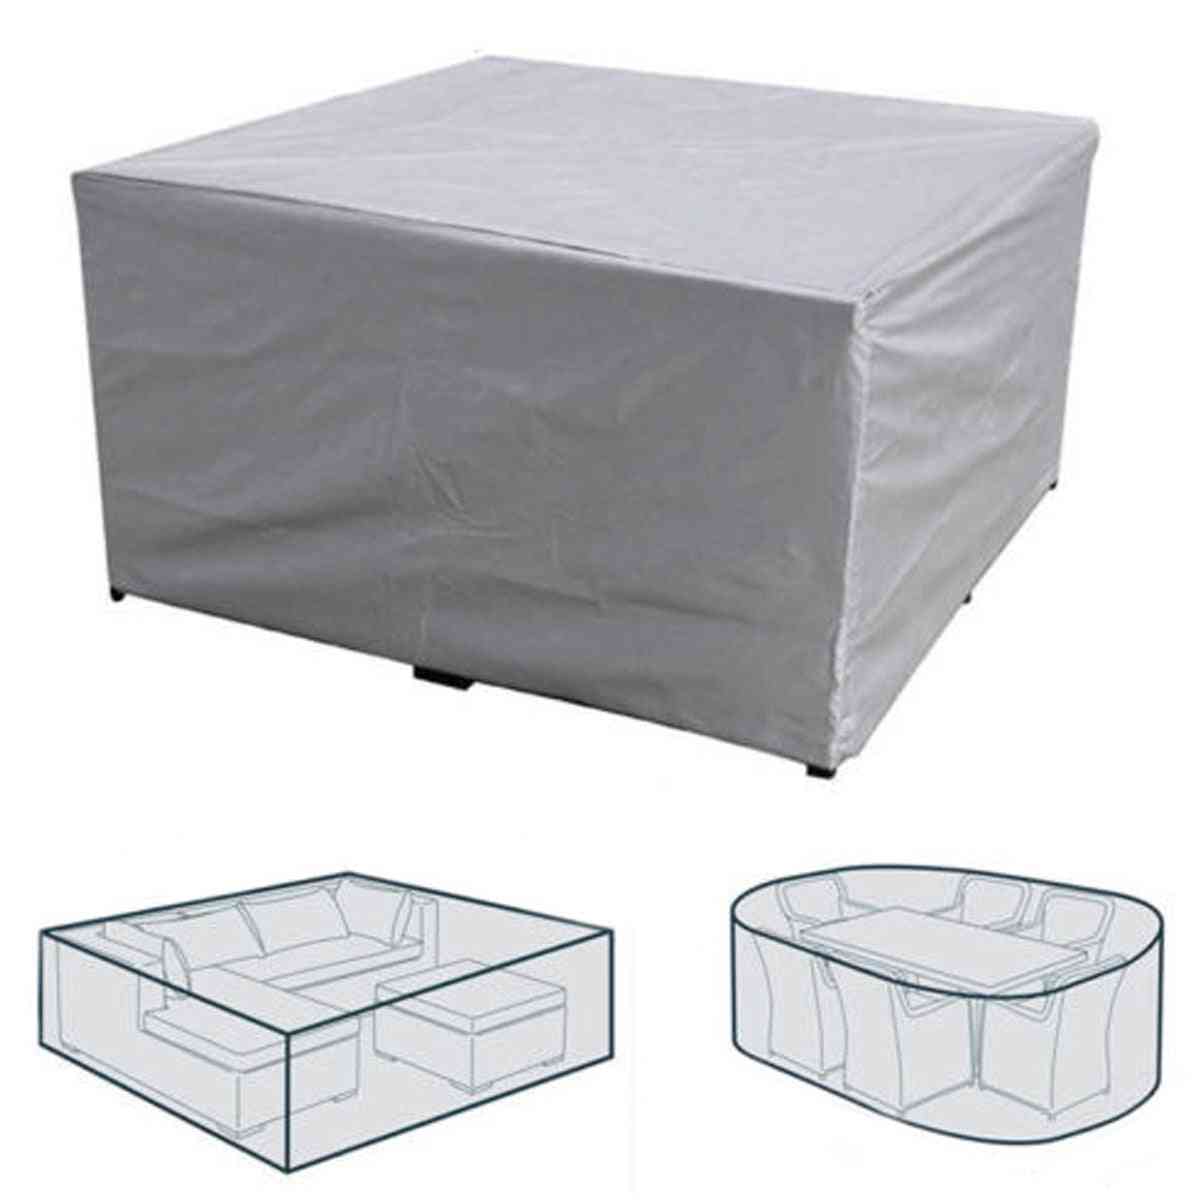 Waterproof Outdoor Garden - Furniture Covers For Chair, Tables Etc